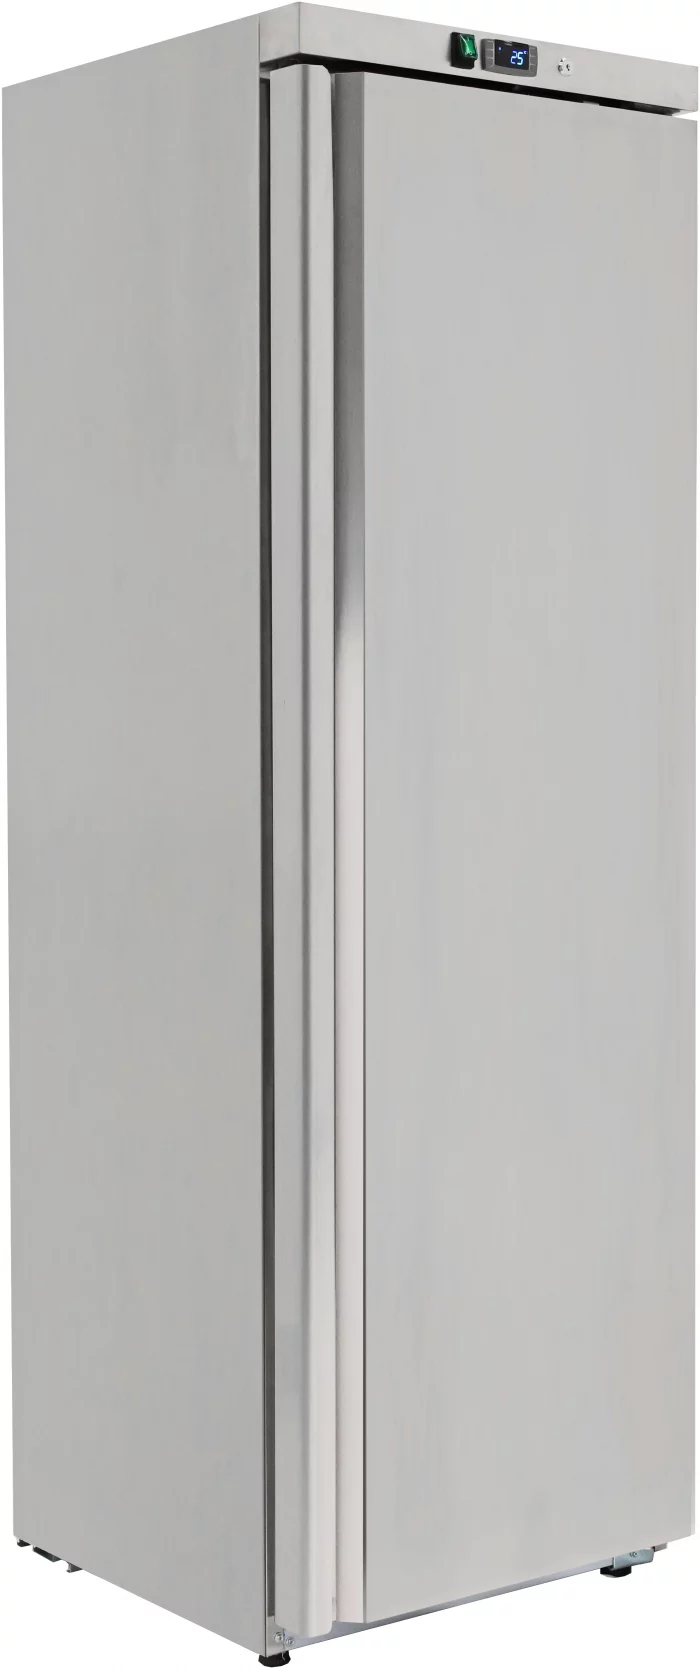 Sterling Pro Freezer Cobus SPF400S Single Door Stainless Steel Upright 360 Litres 875 scaled Sterling Pro Freezer Cobus SPF400S Single Door Stainless Steel Upright 360 Litres.